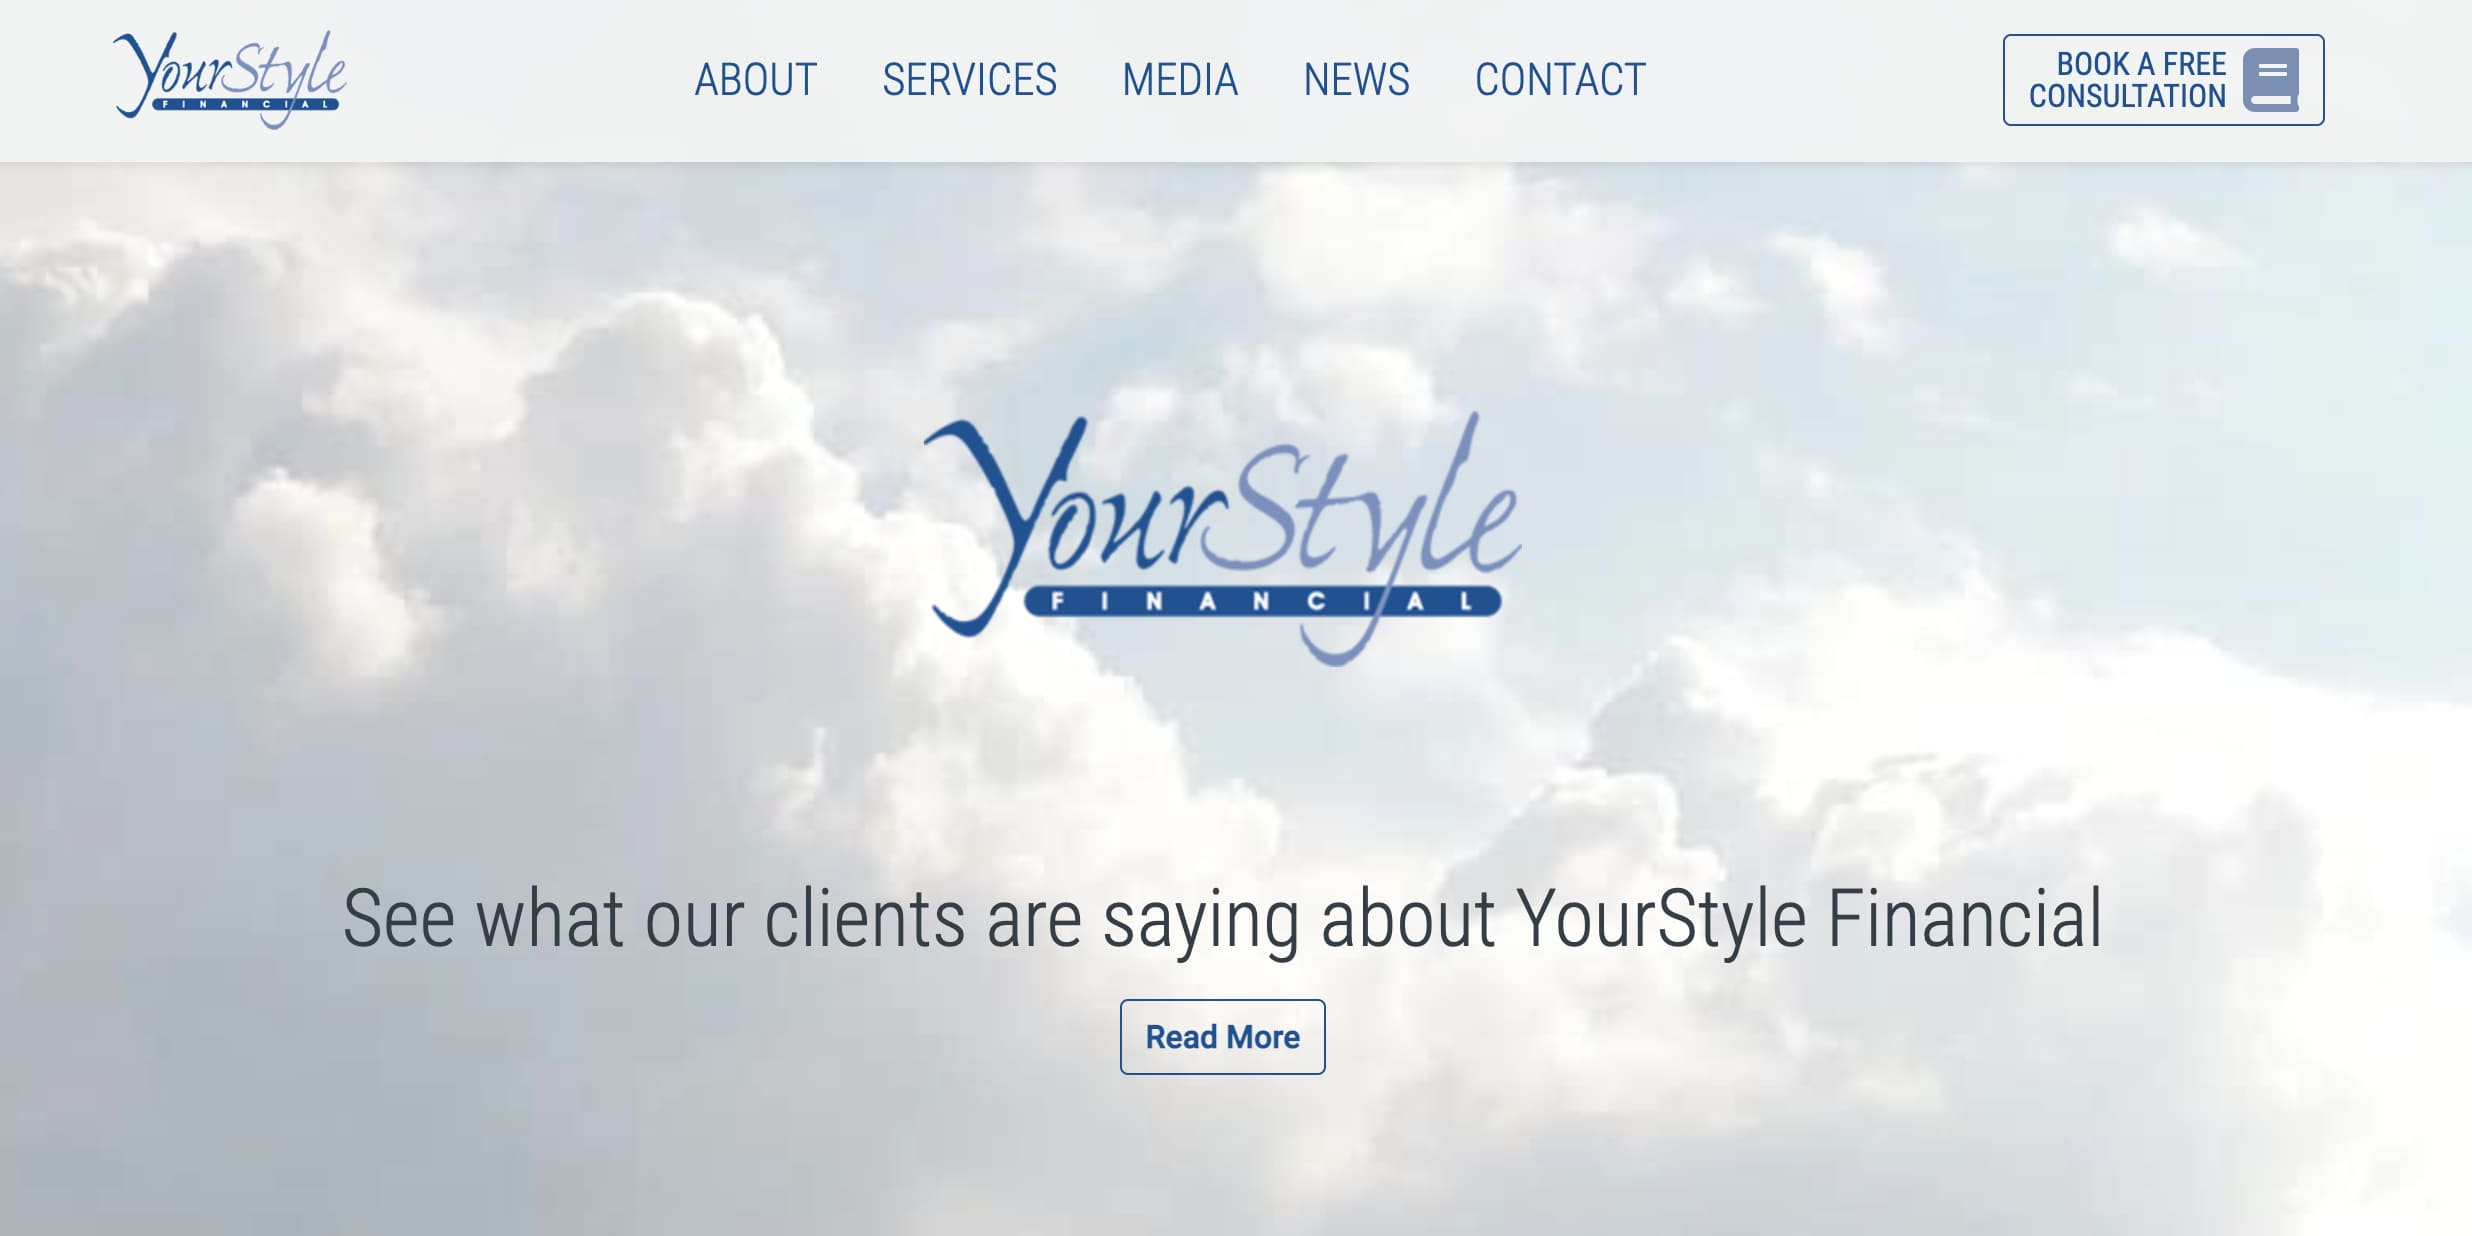 Yourstyle Financial